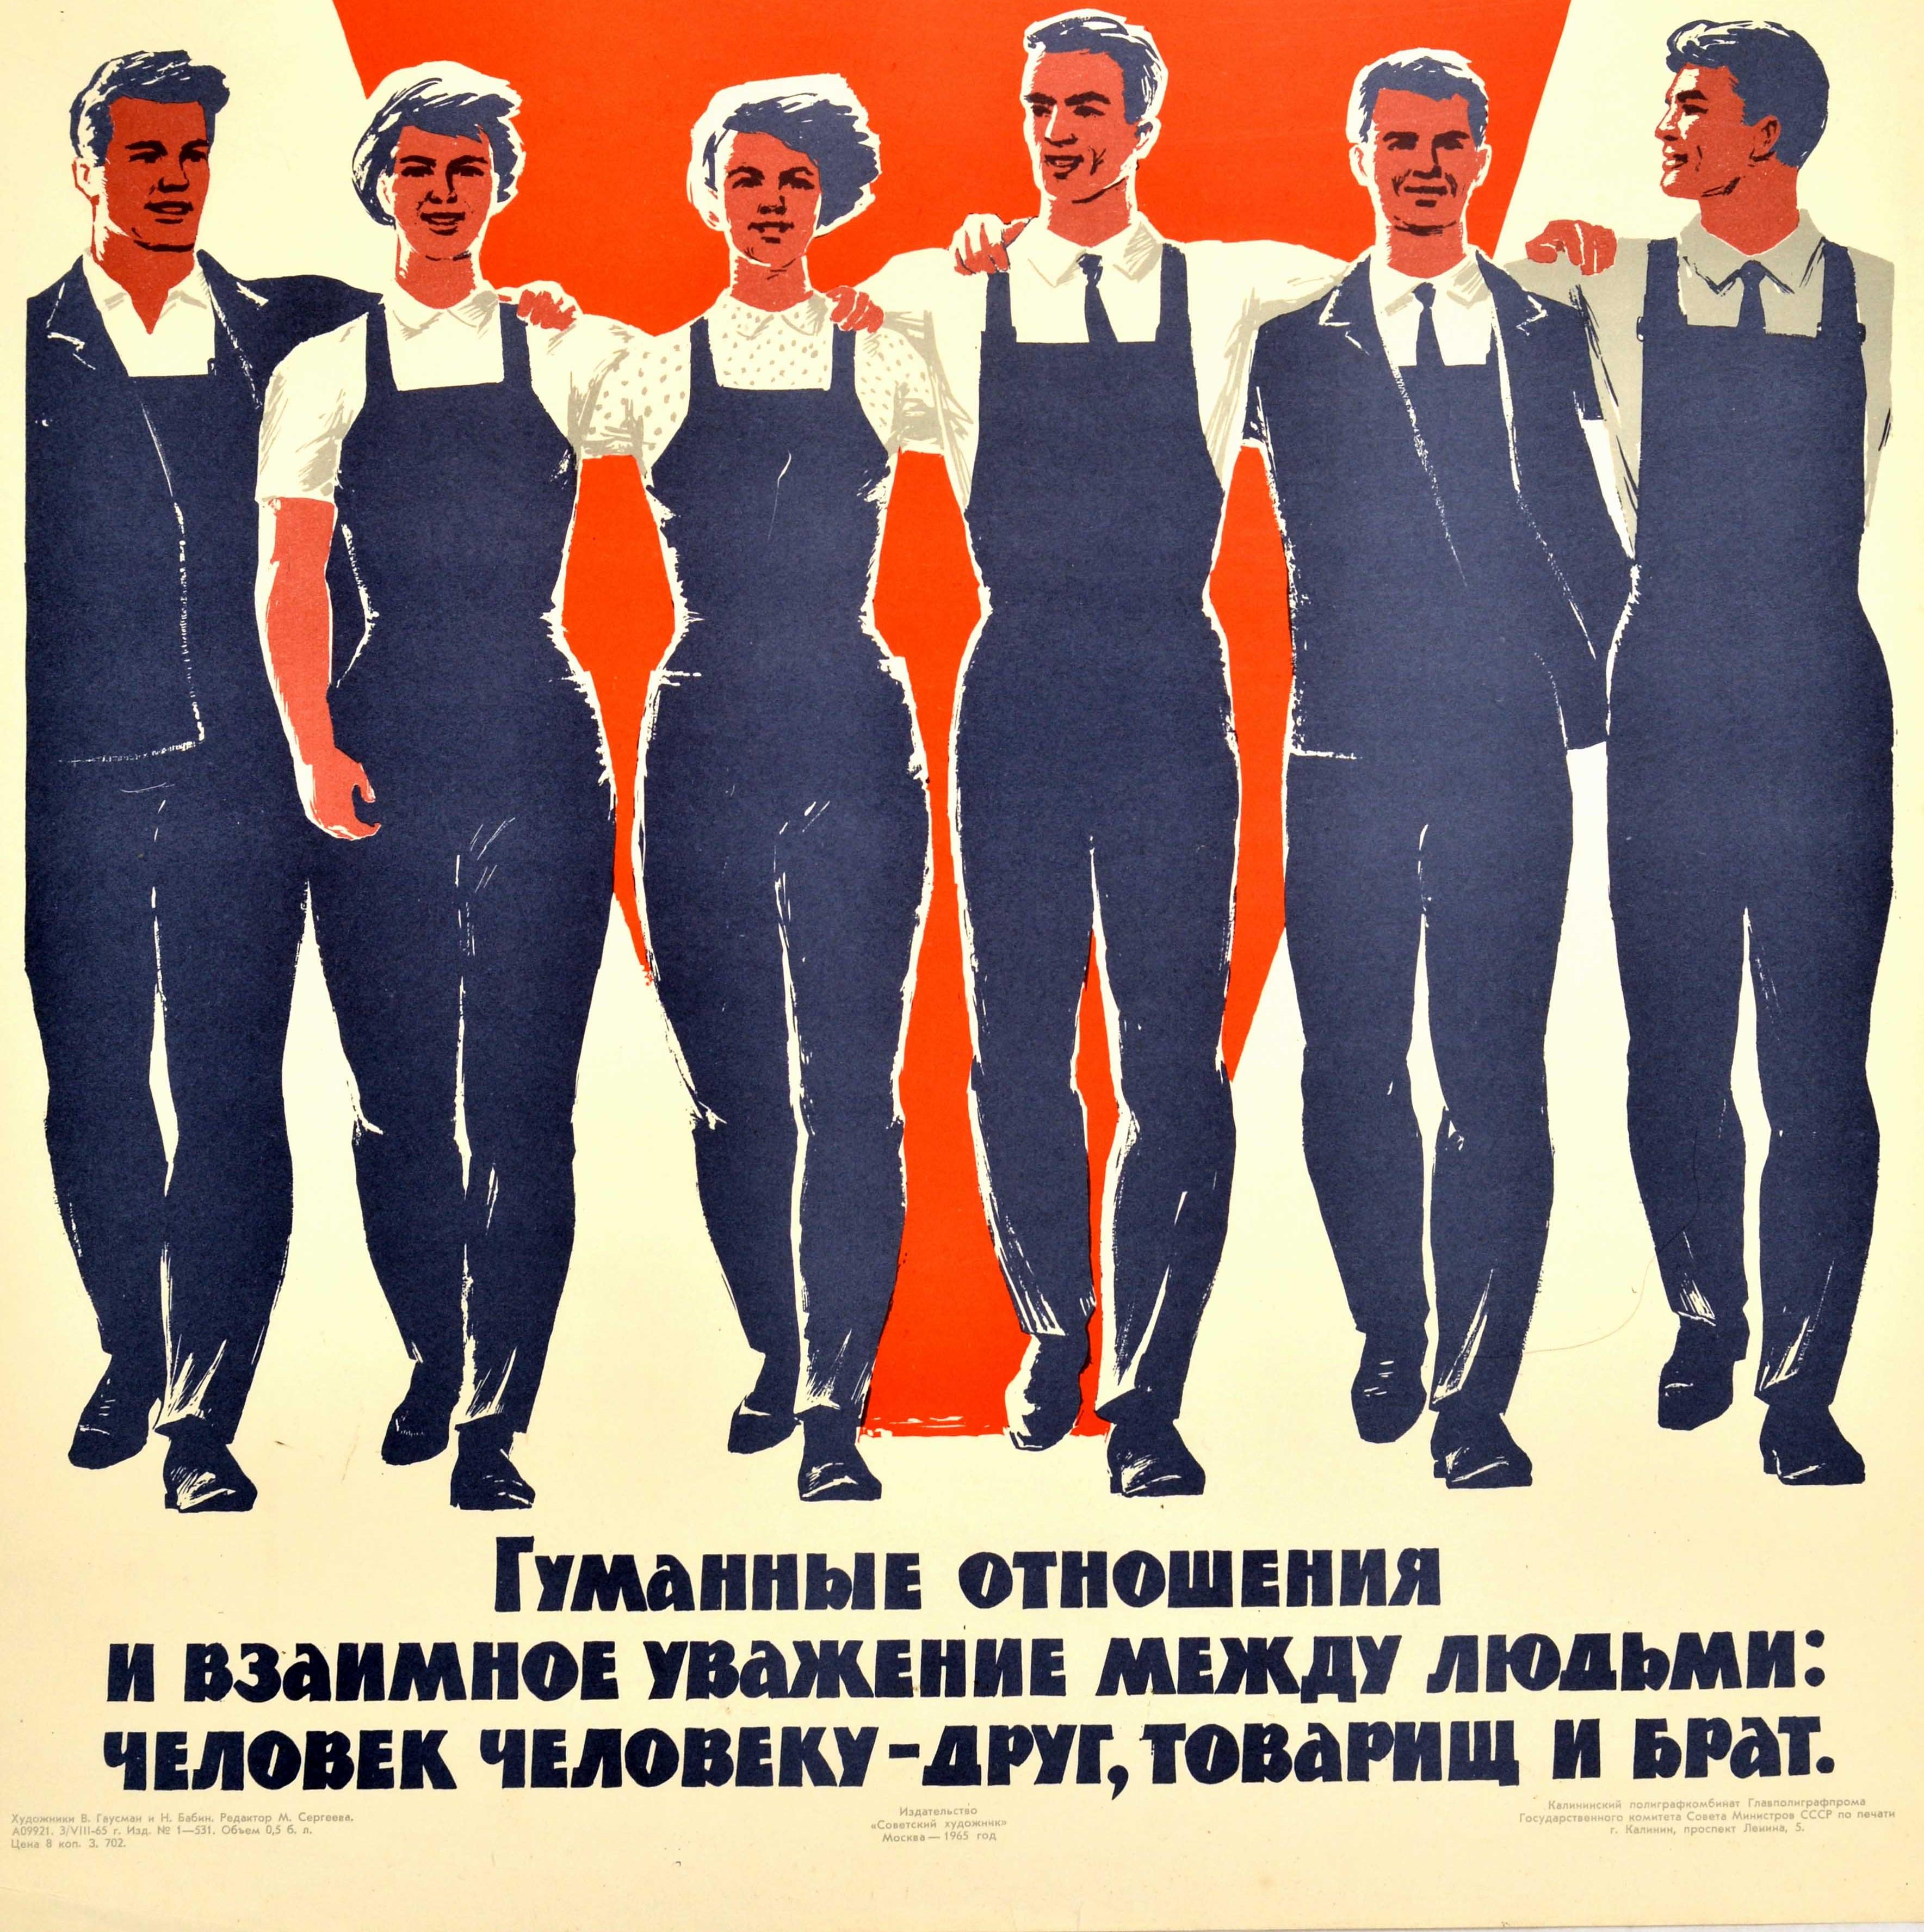 Original vintage Soviet propaganda poster - Communist labour team Humane relations and mutual respect between the people: a person is a friend to another, a comrade and a brother - featuring a great workplace motivation design showing a group of